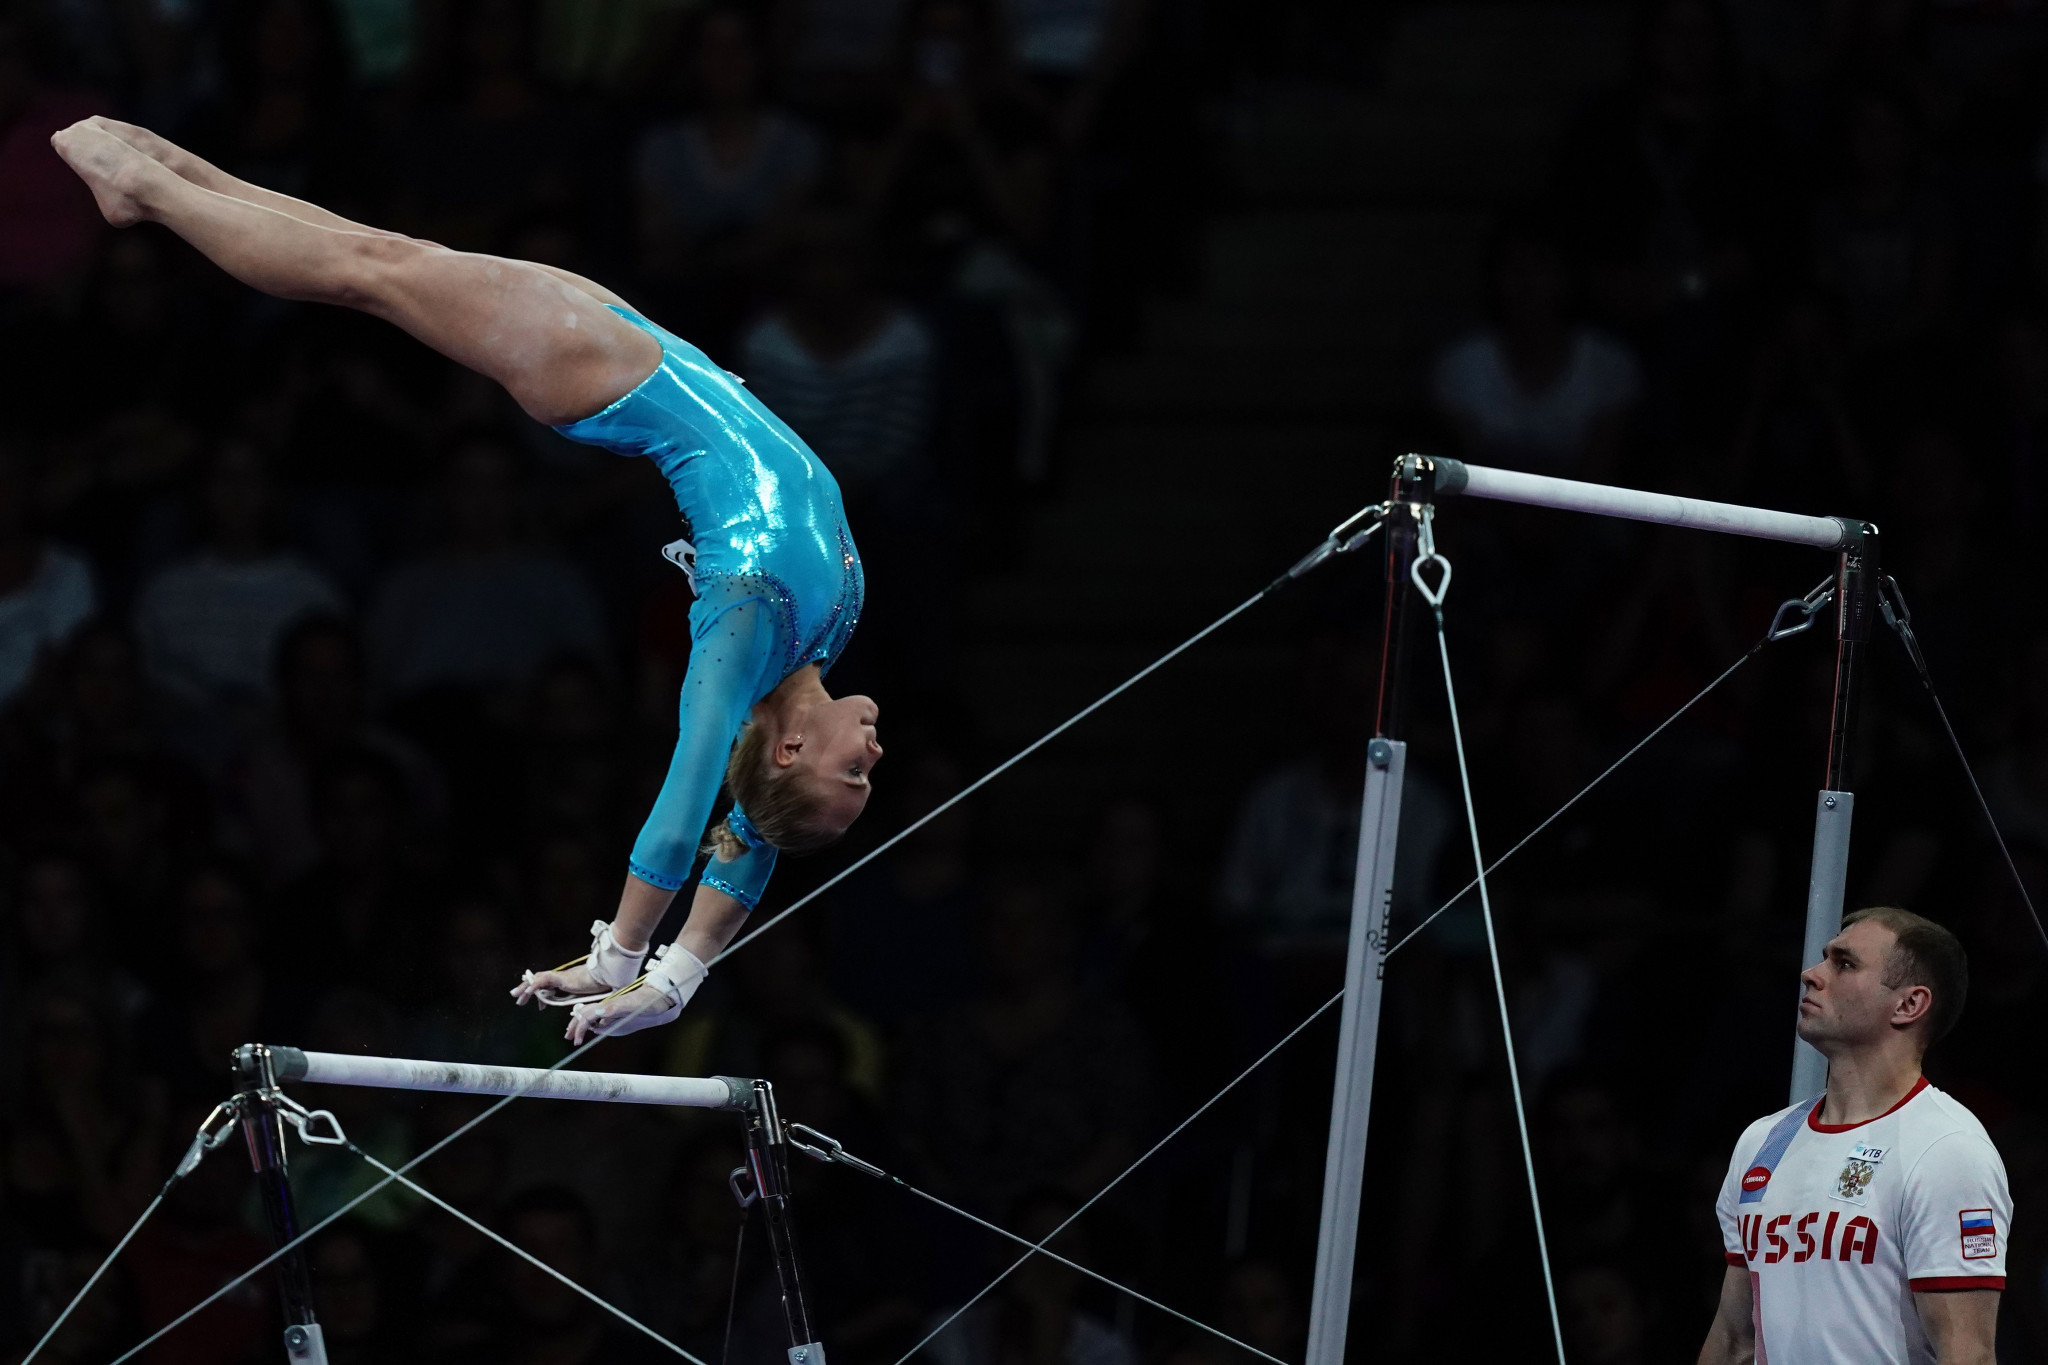 Russia has withdrawn from the European Artistic Gymnastics Championships ©Getty Images